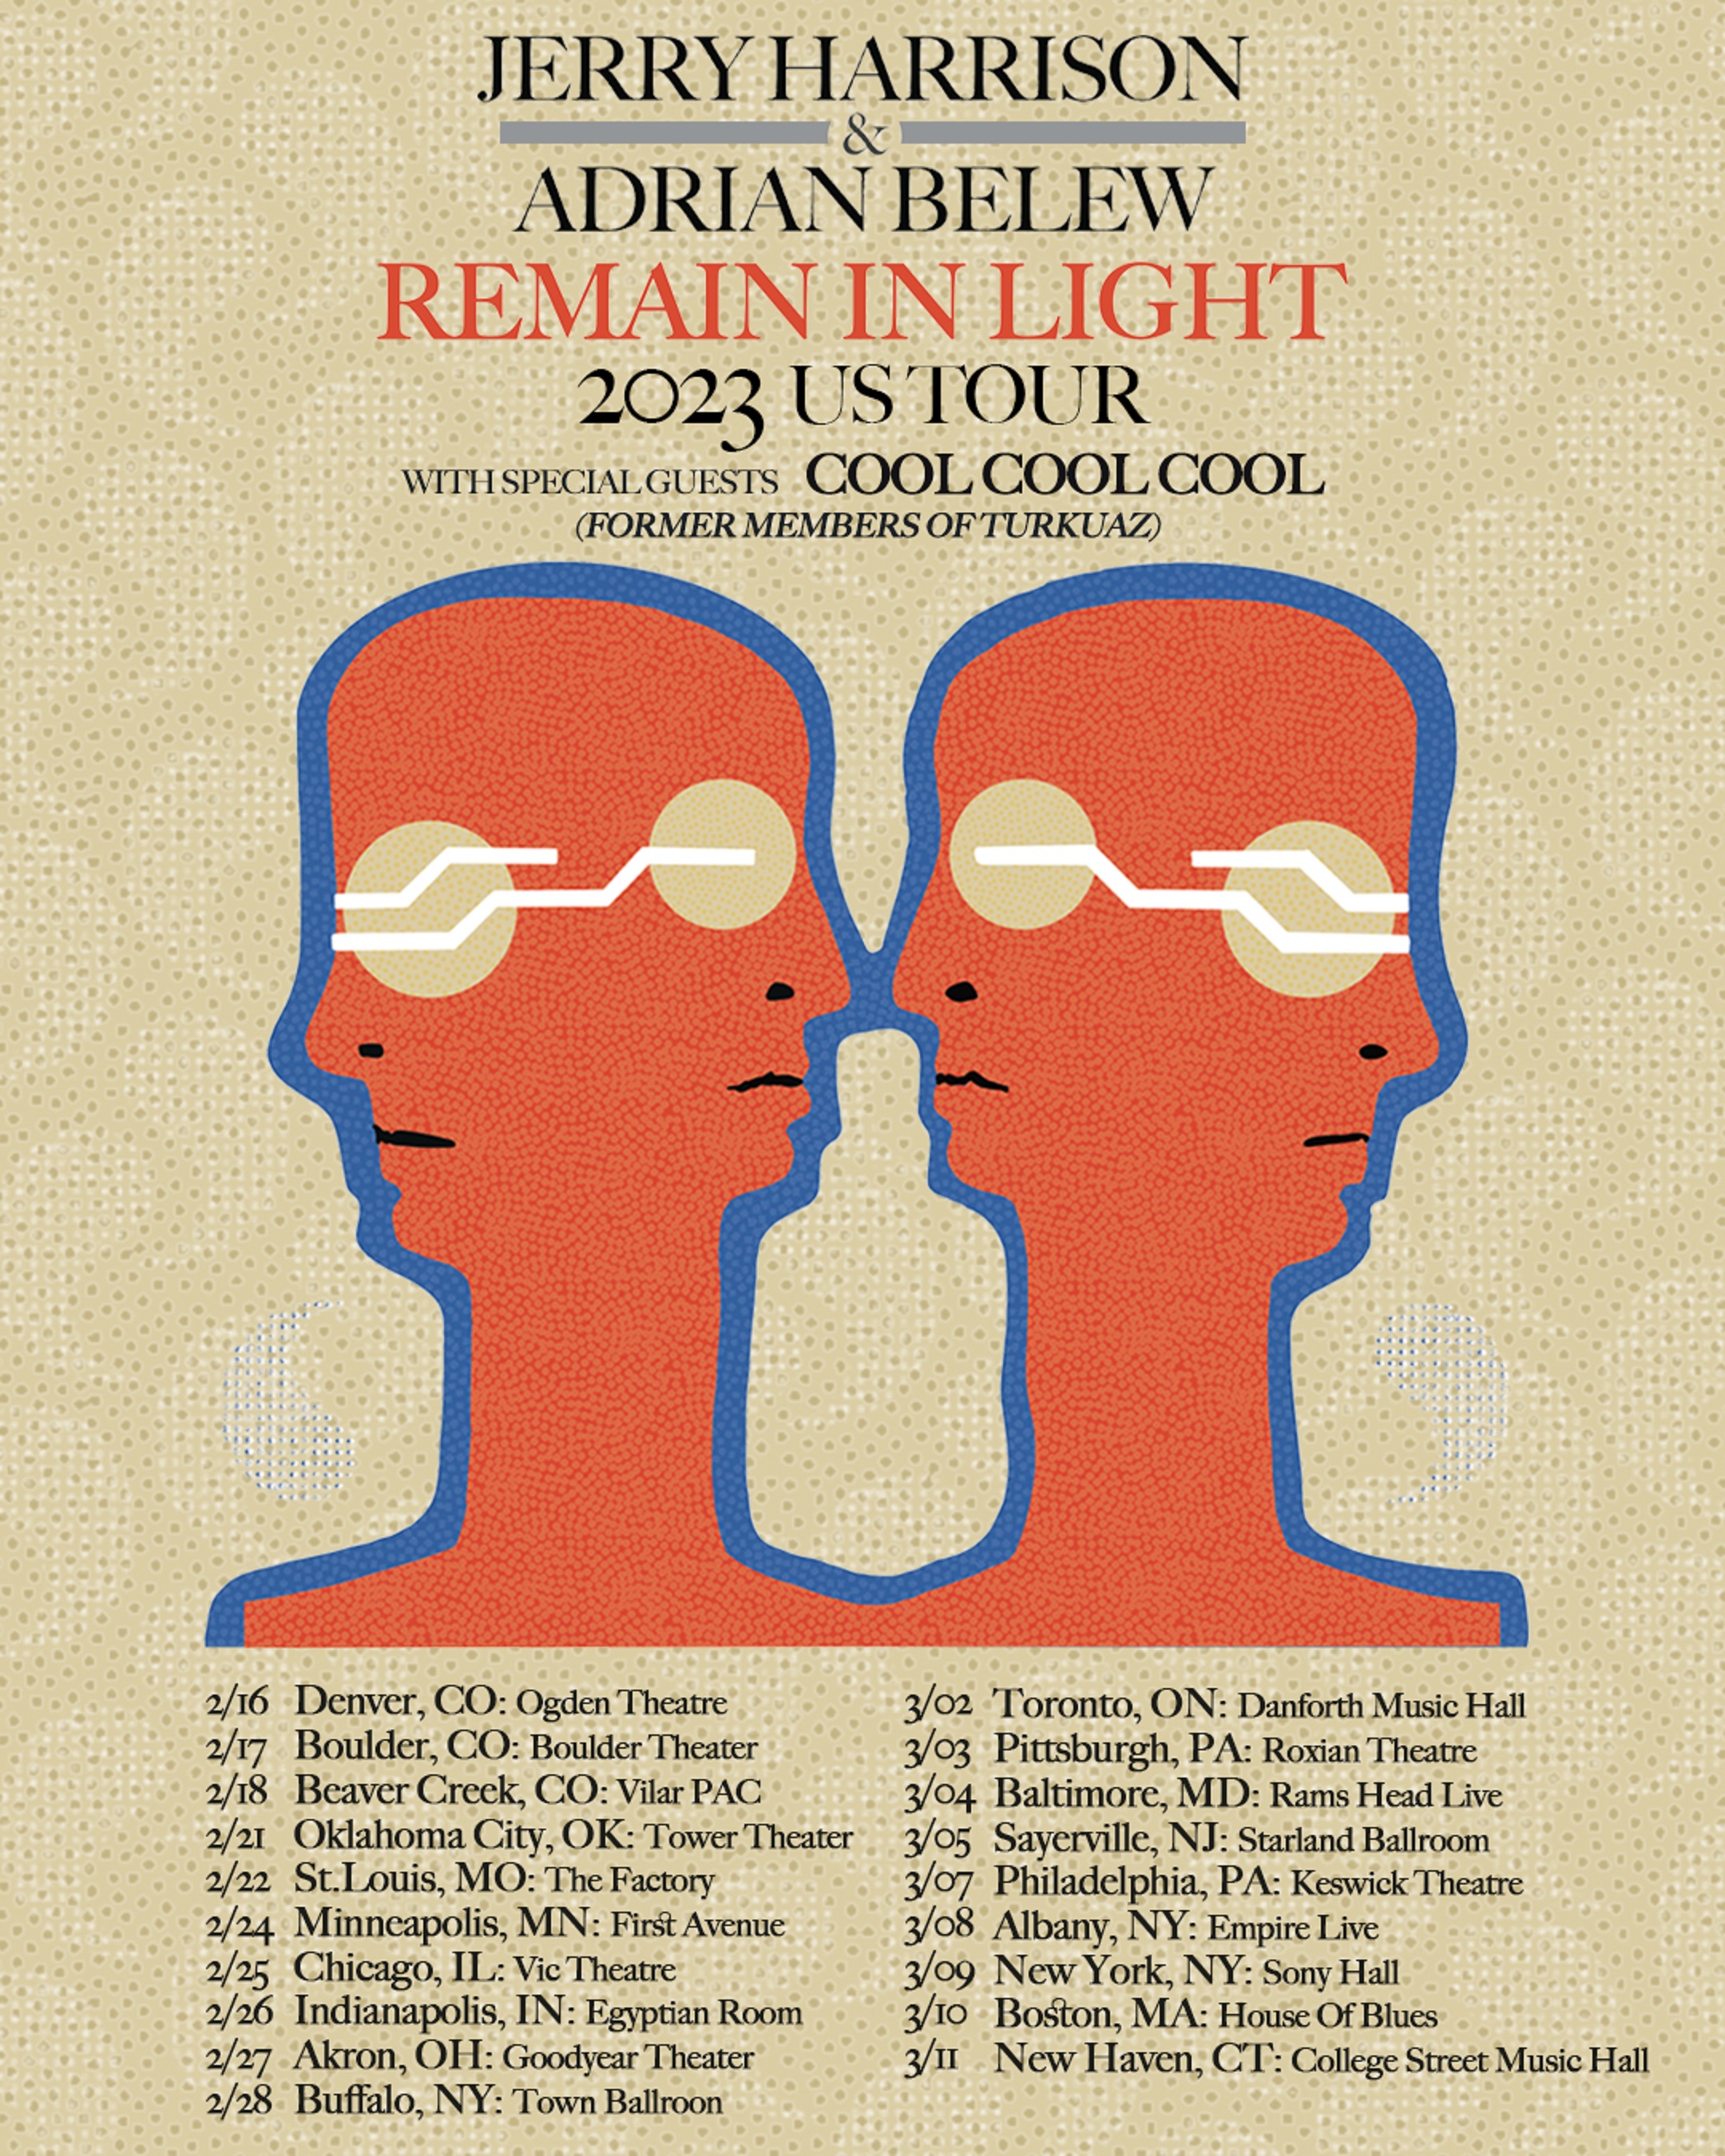 Talking Heads’ Jerry Harrison, Adrian Belew Announce ‘Remain In Light’ Tour